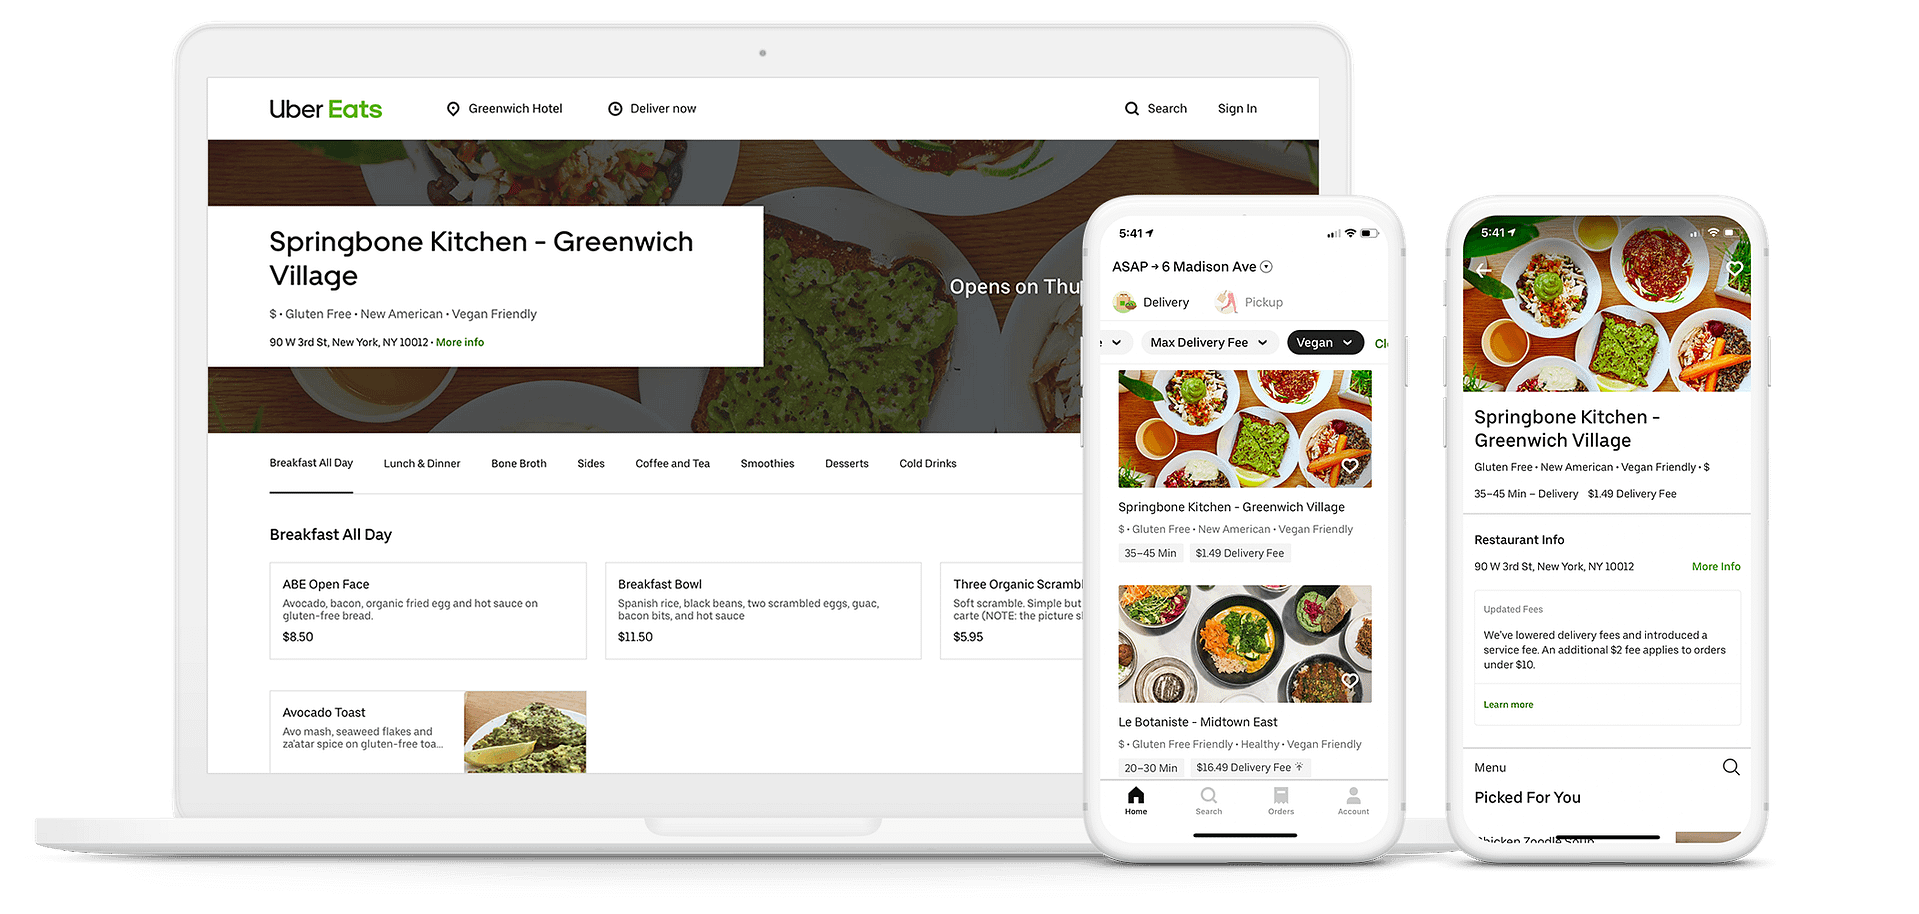 Control the Facts About Your Restaurant on UberEats